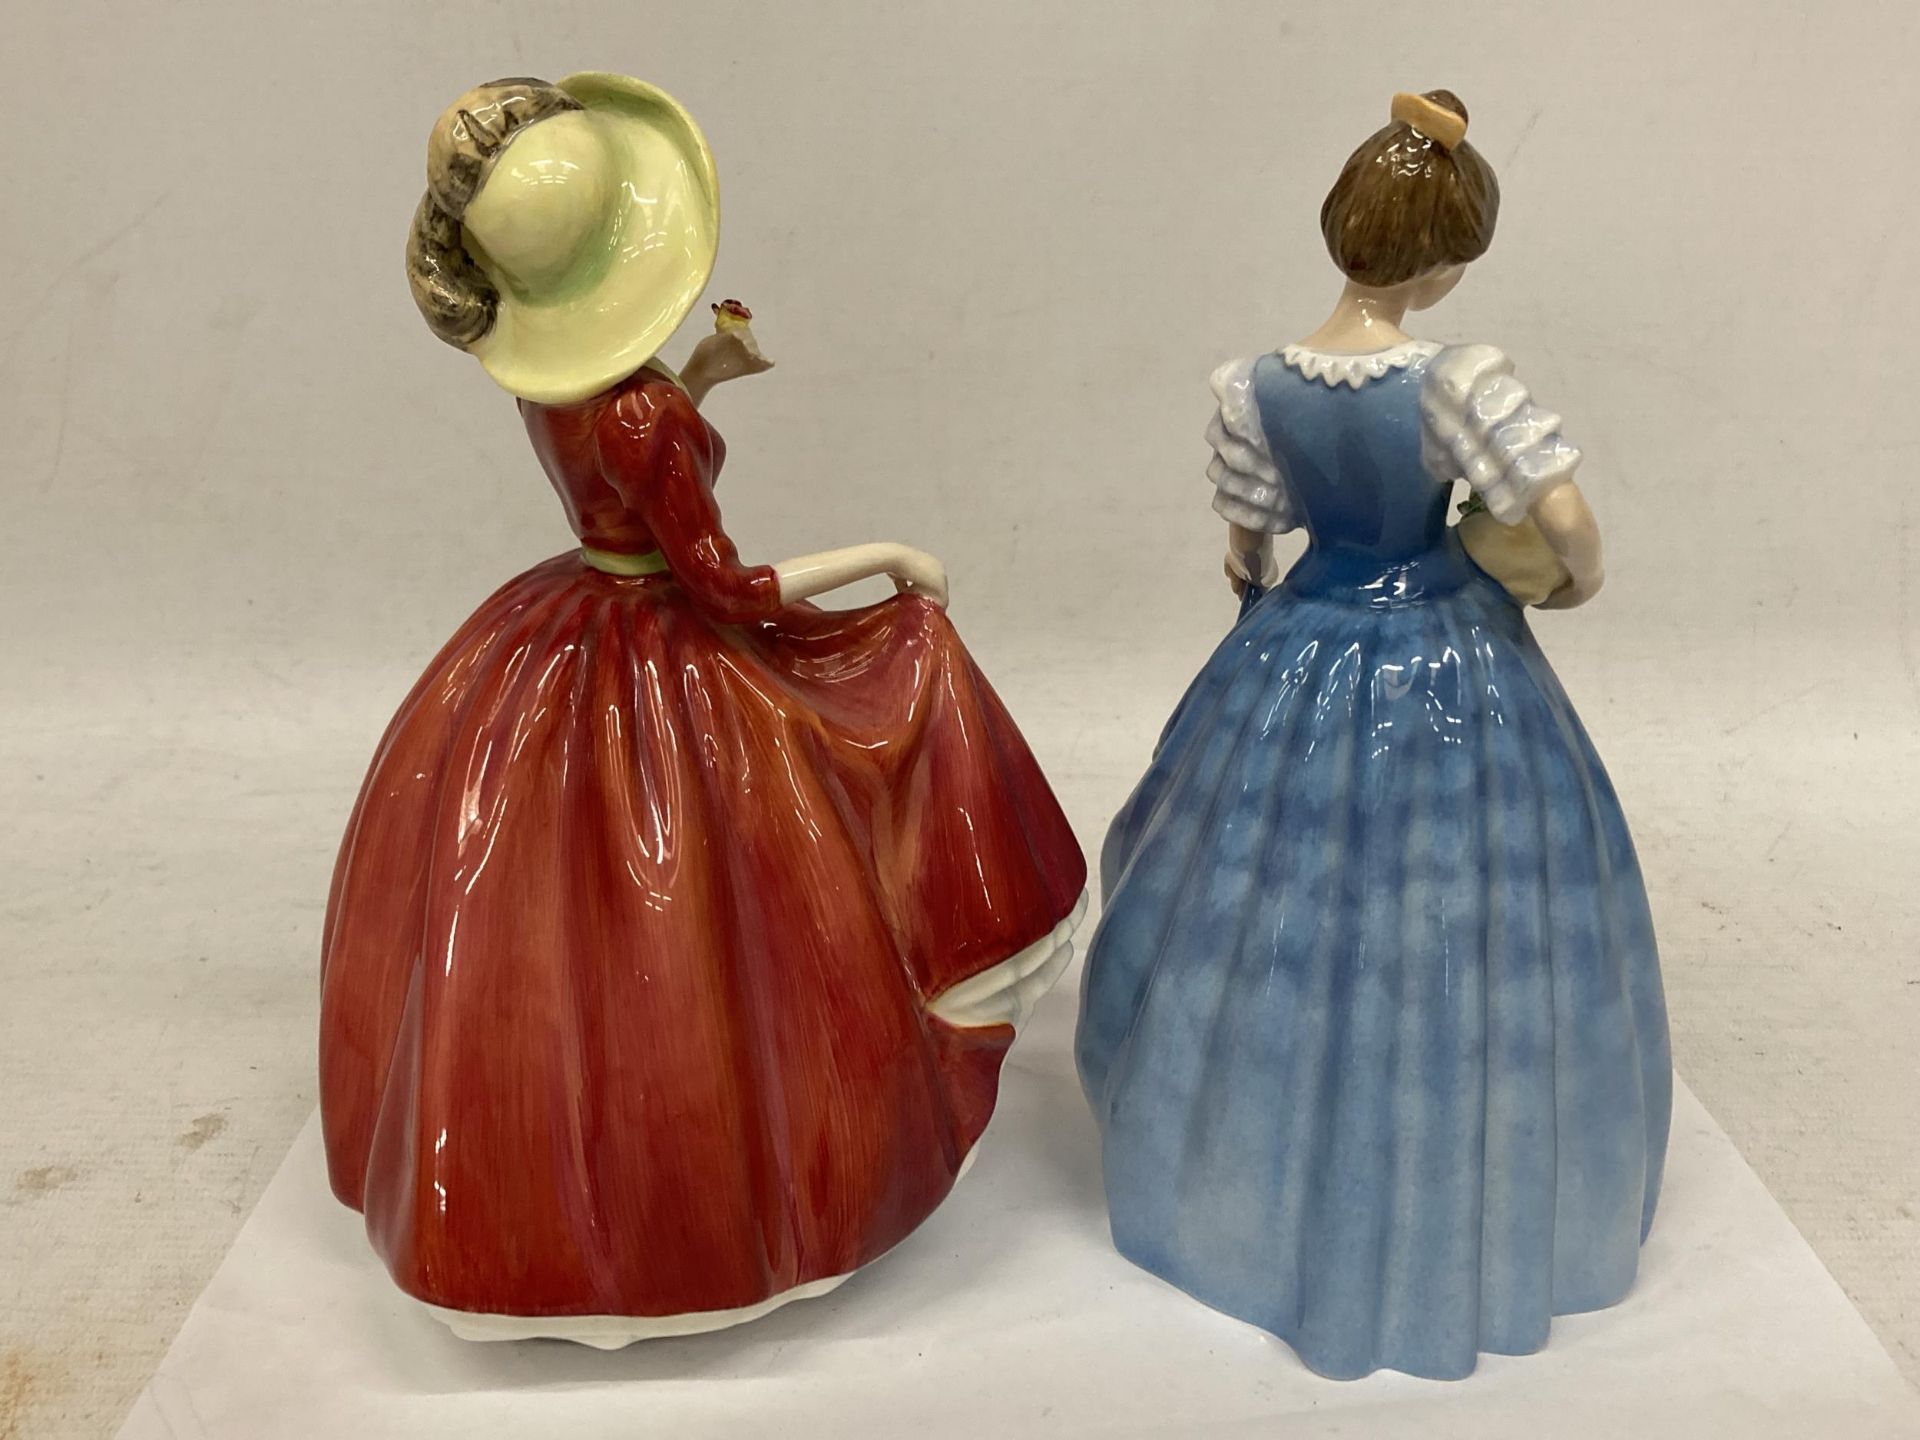 TWO ROYAL DOULTON FIGURINES "A SINGLE RED ROSE" HN 3376 AND "HELEN" HN3601 - Image 2 of 4